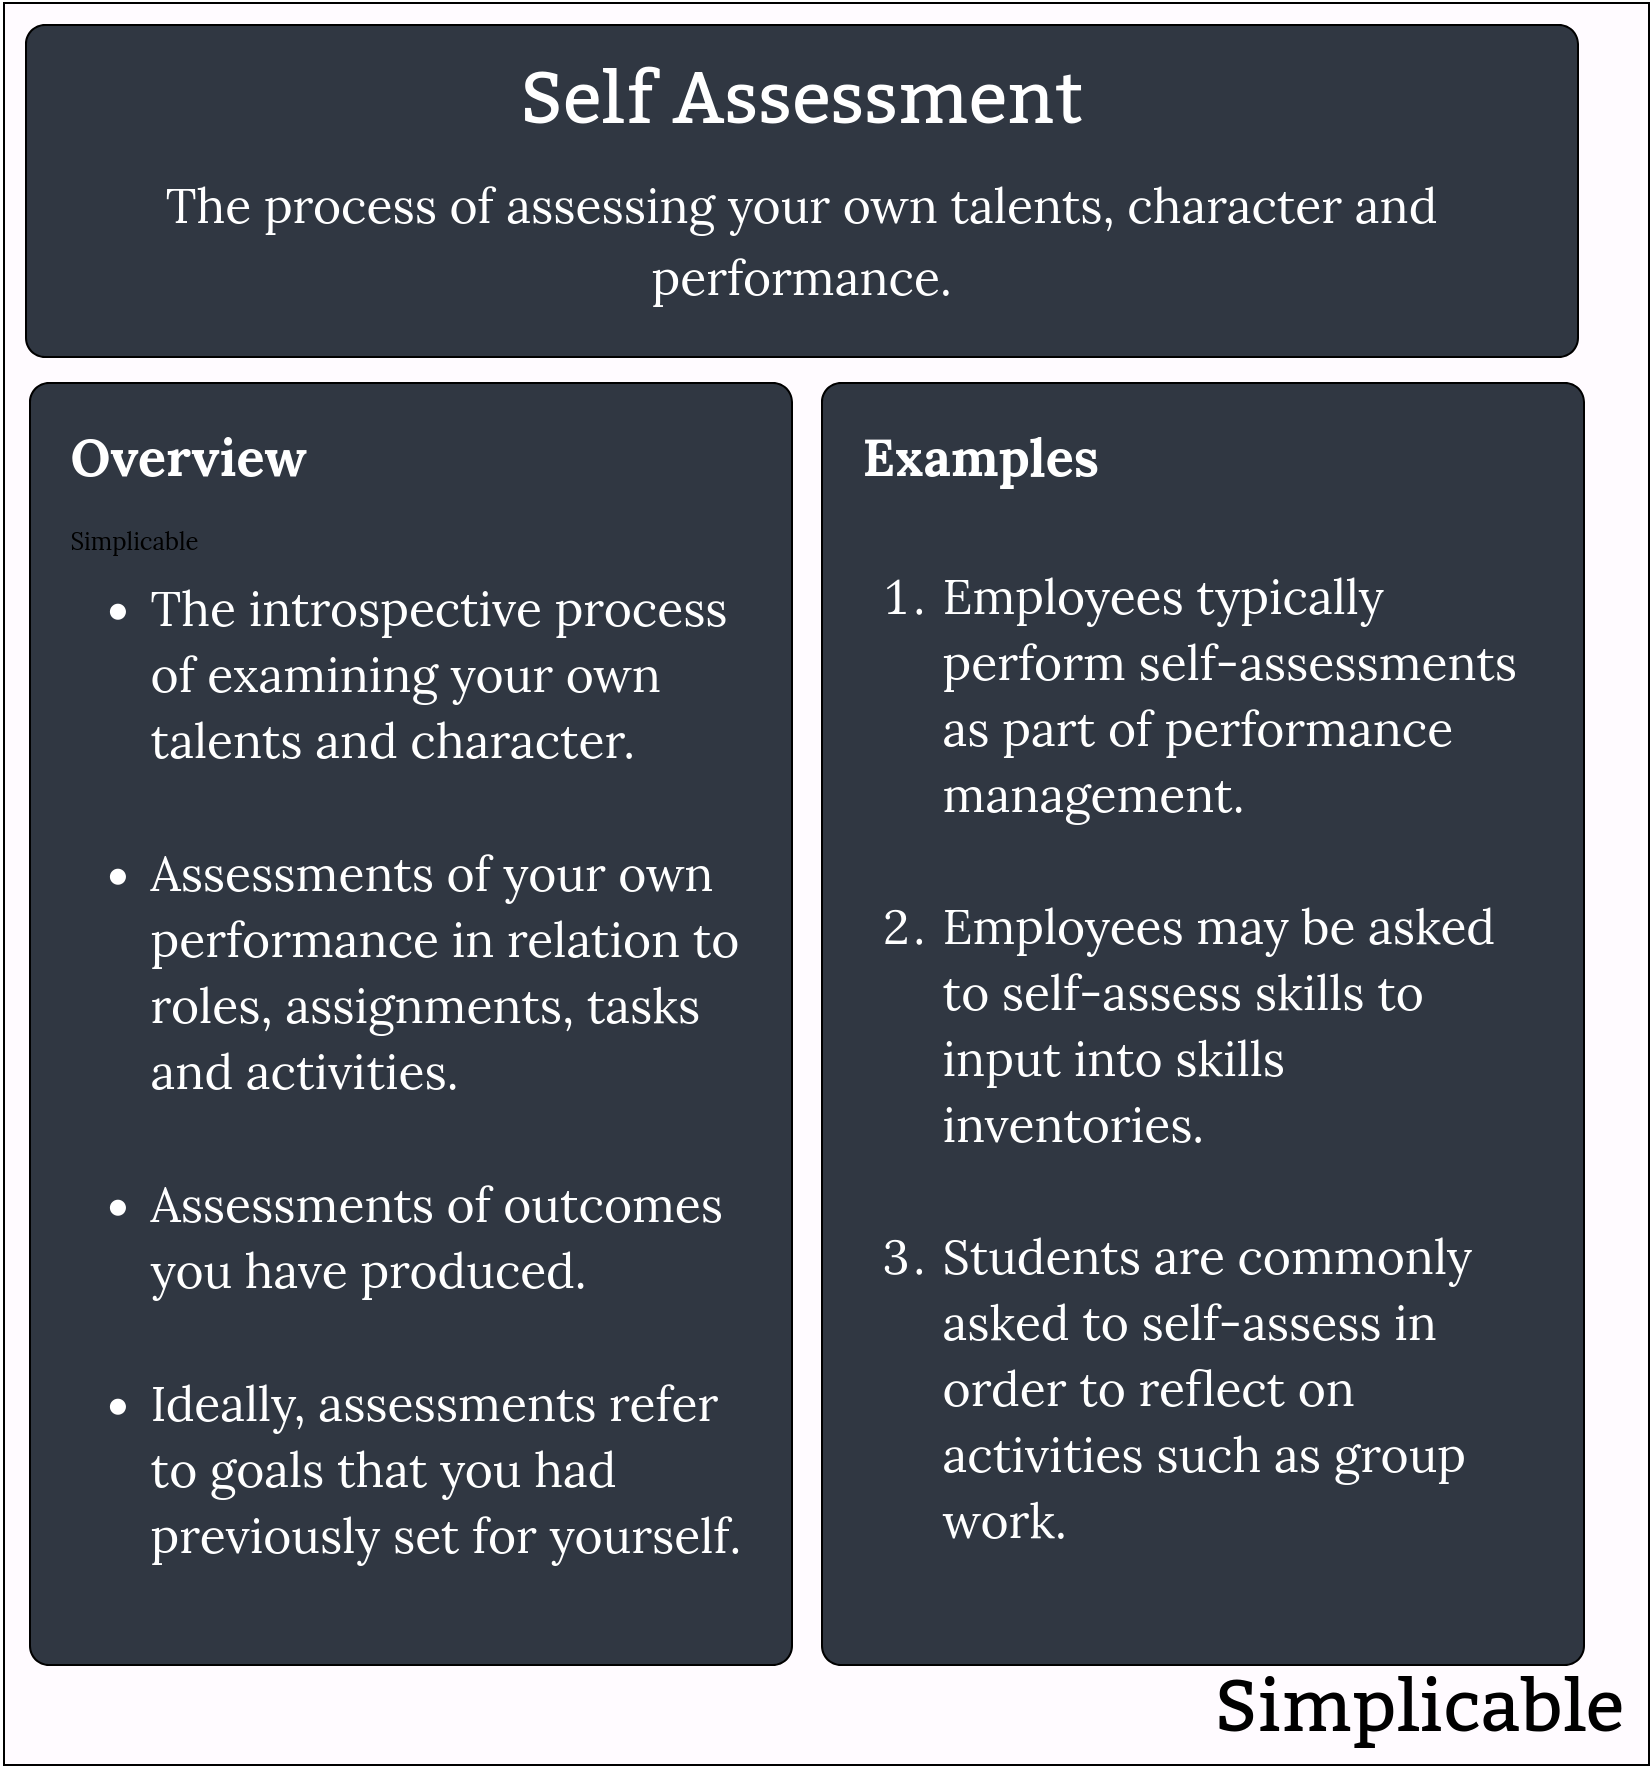 self assessment definition and examples